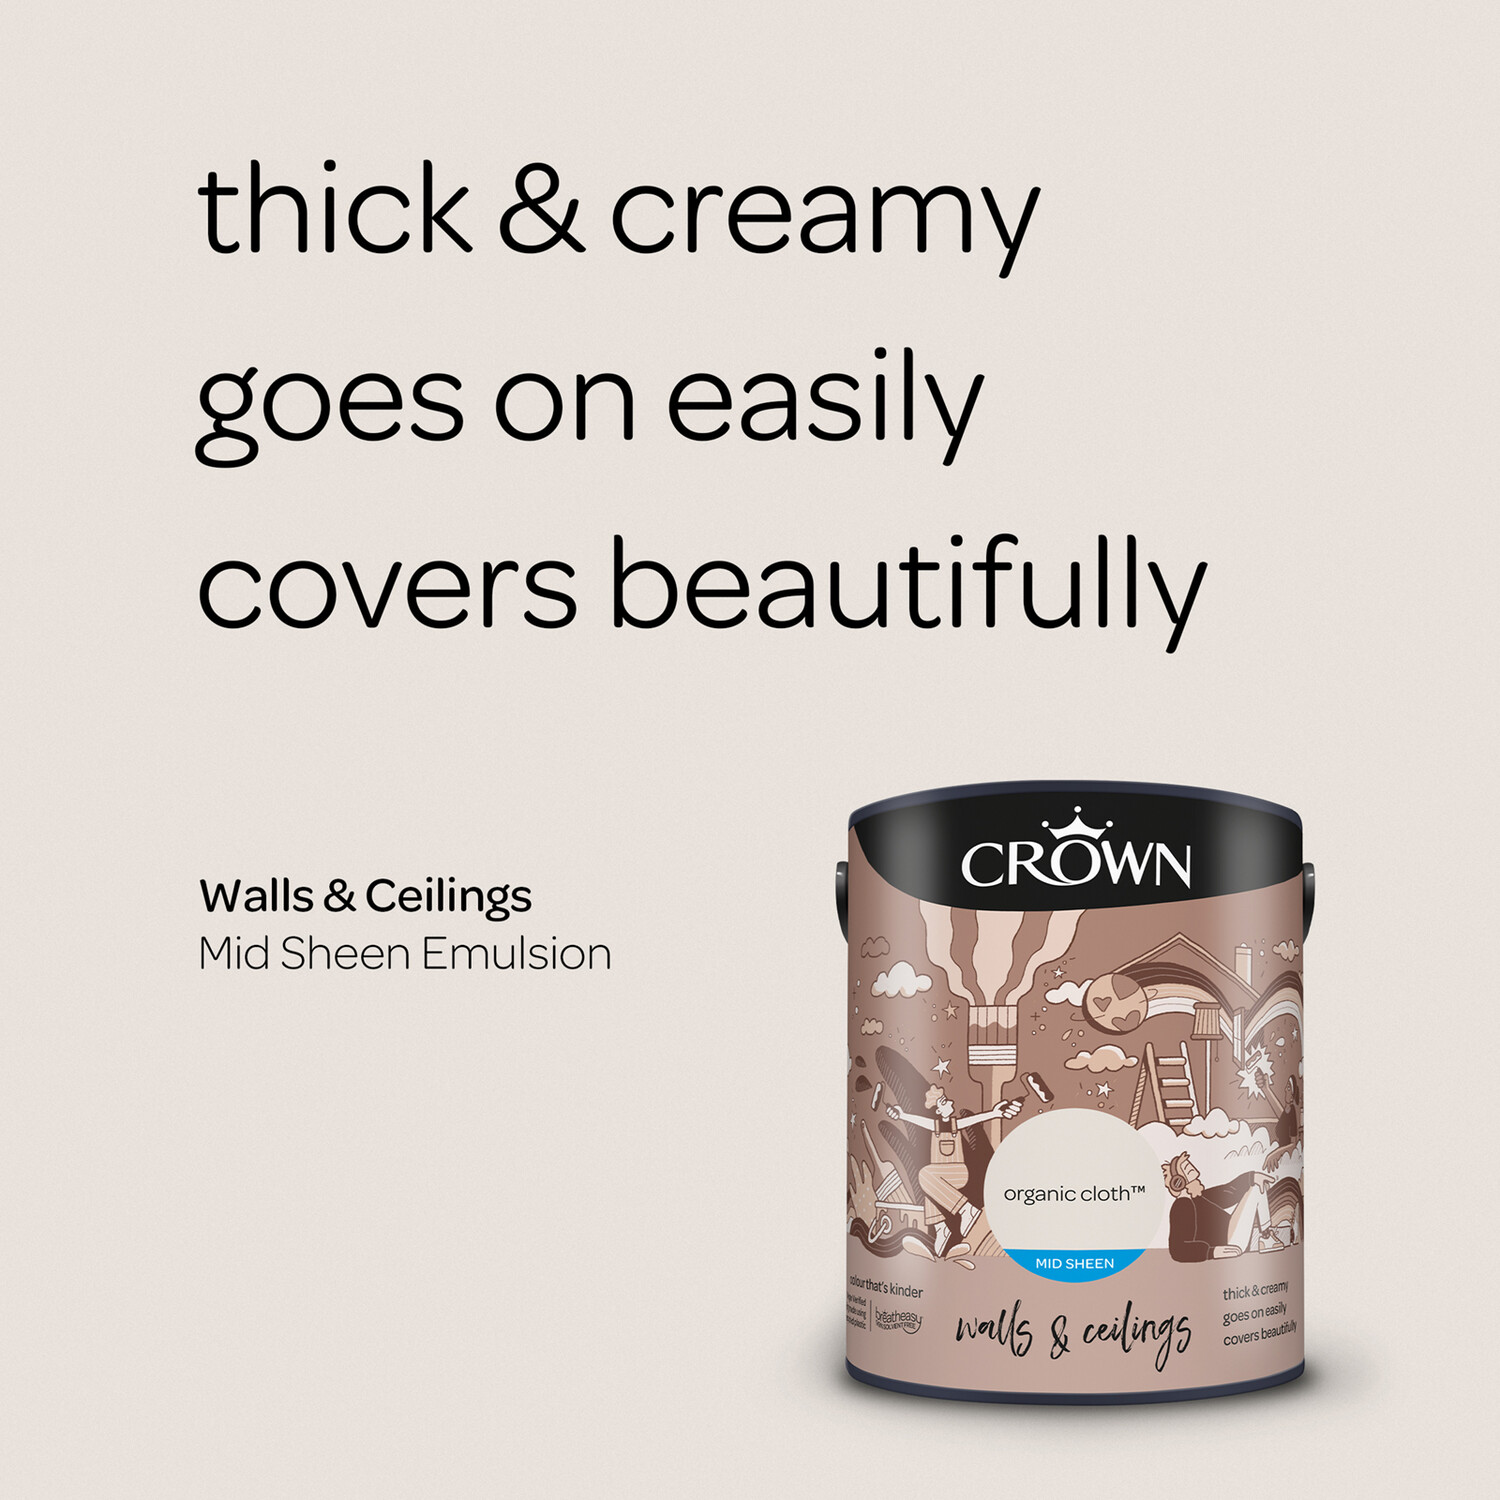 Crown Walls & Ceilings Organic Cloth Mid Sheen Emulsion Paint 5L Image 8